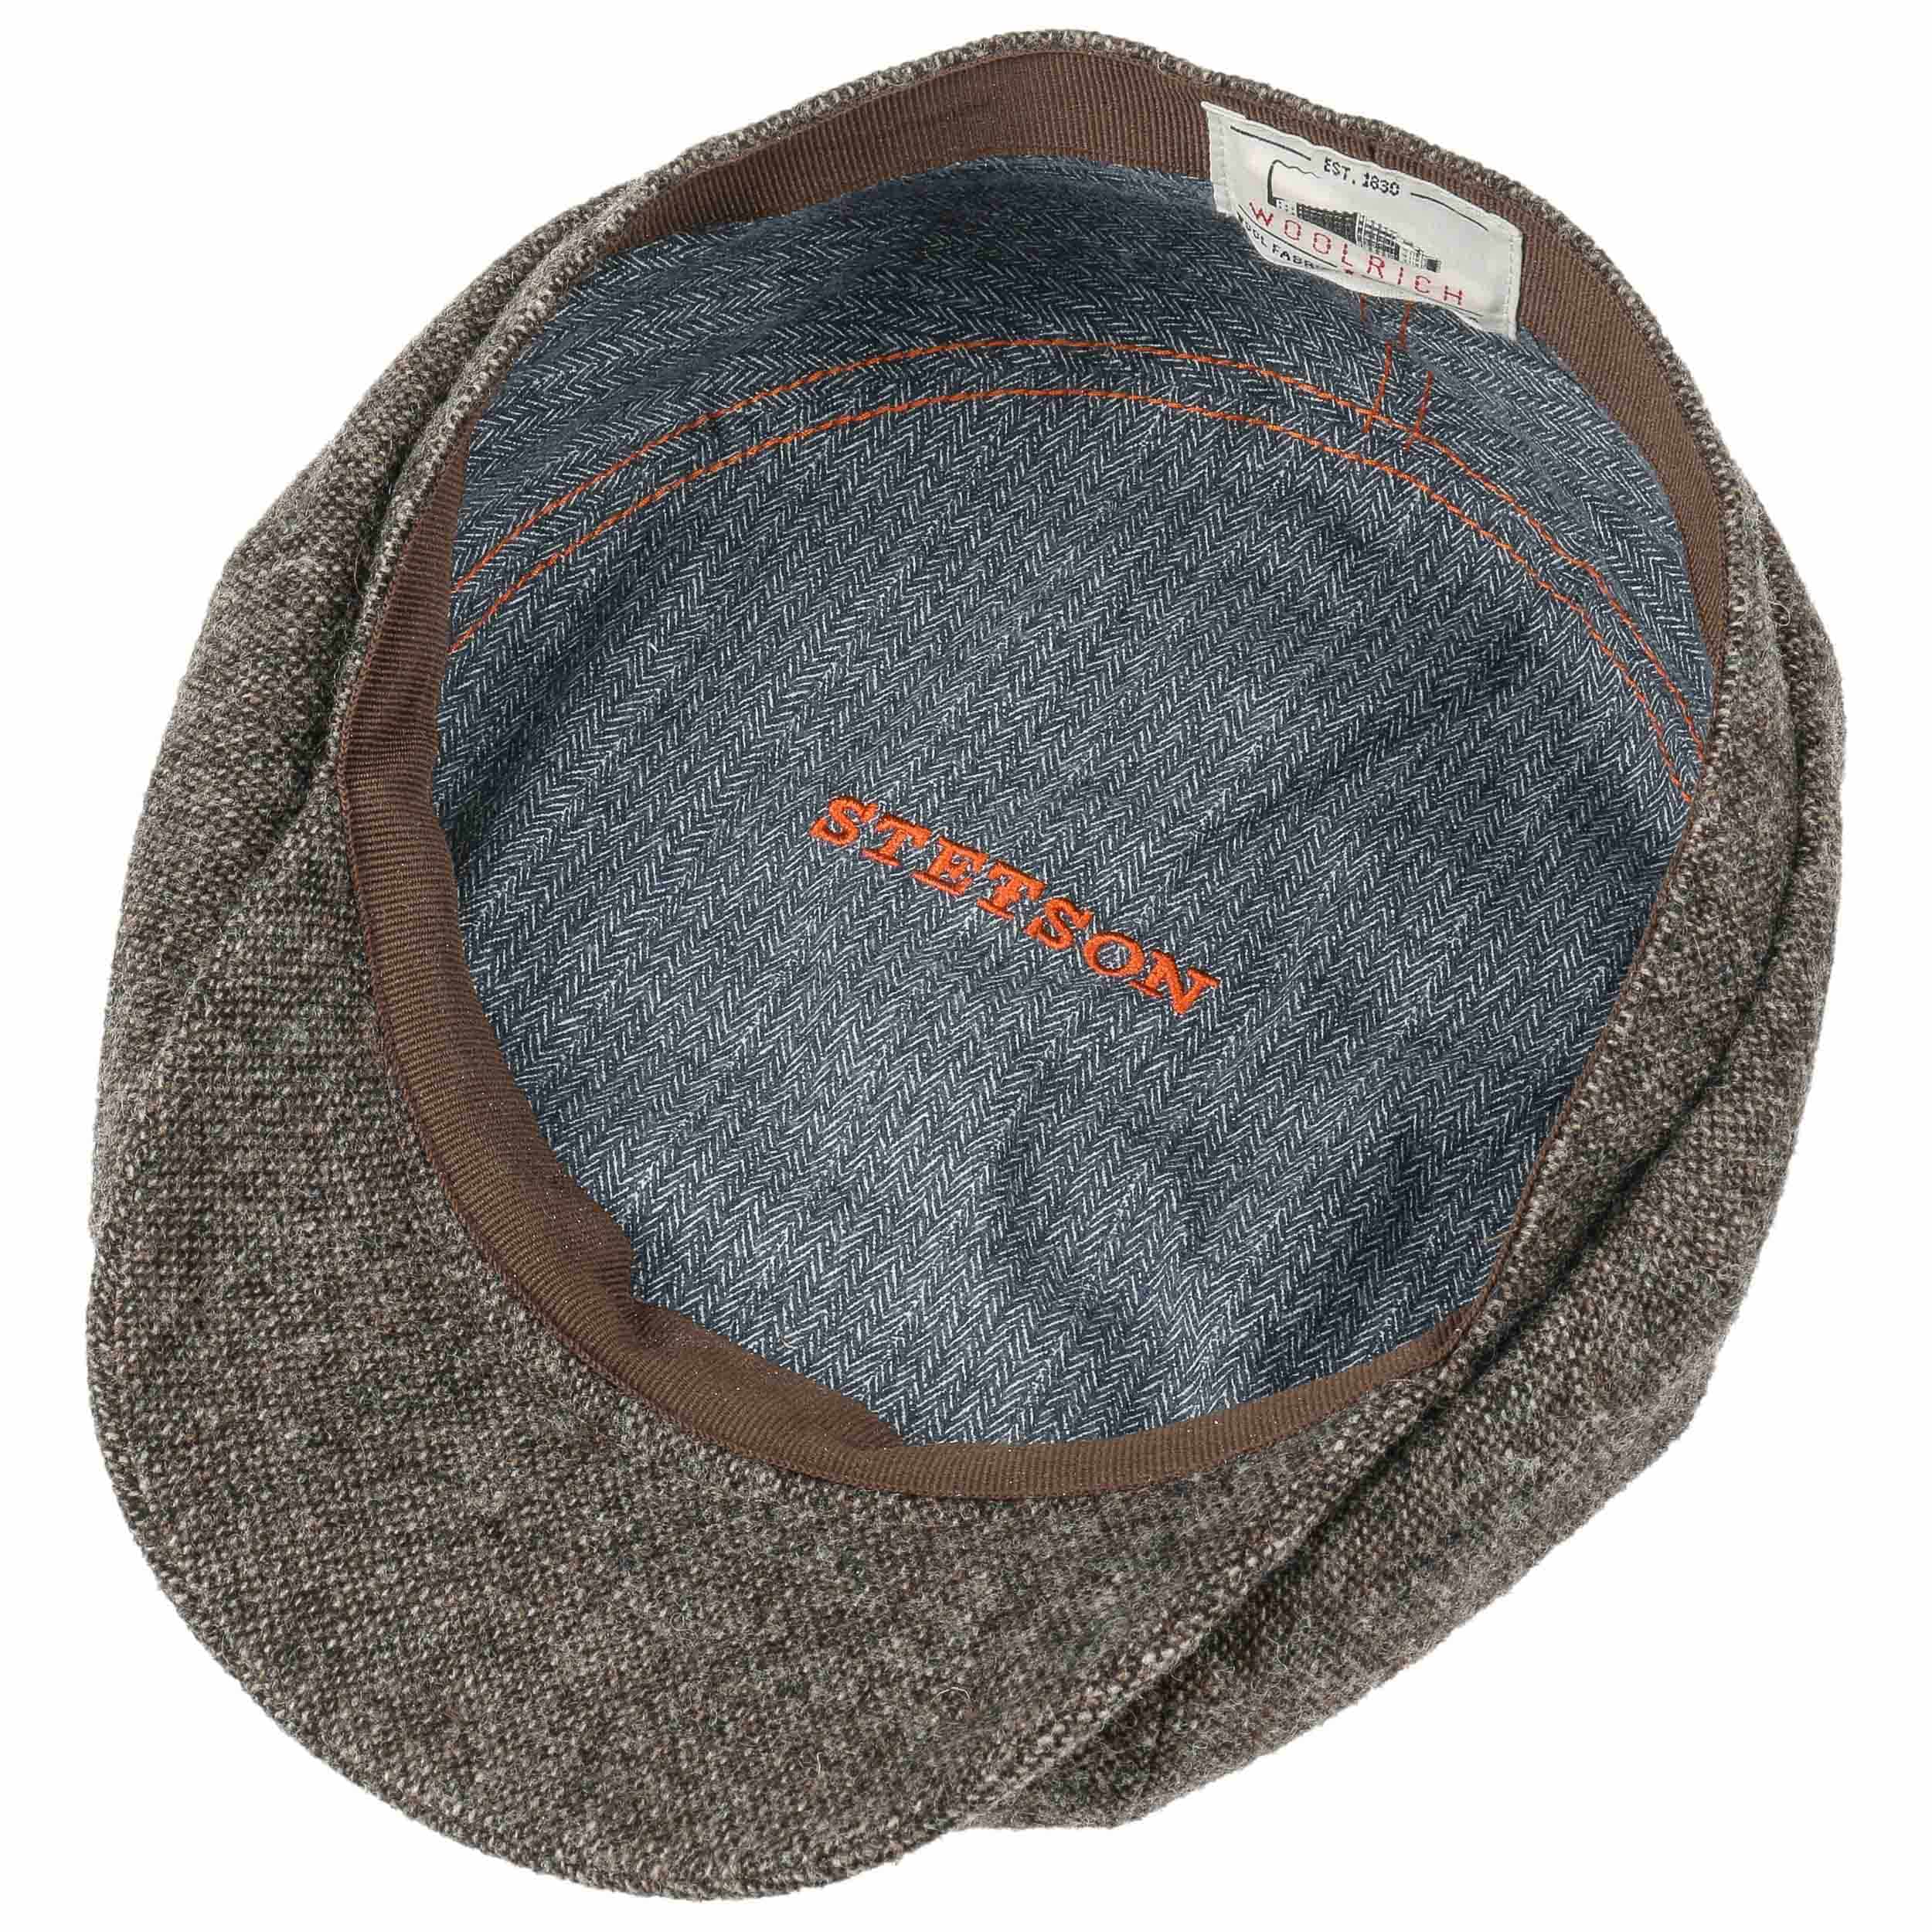 Hatteras Woolrich Donegal Cap by Stetson - 79,00